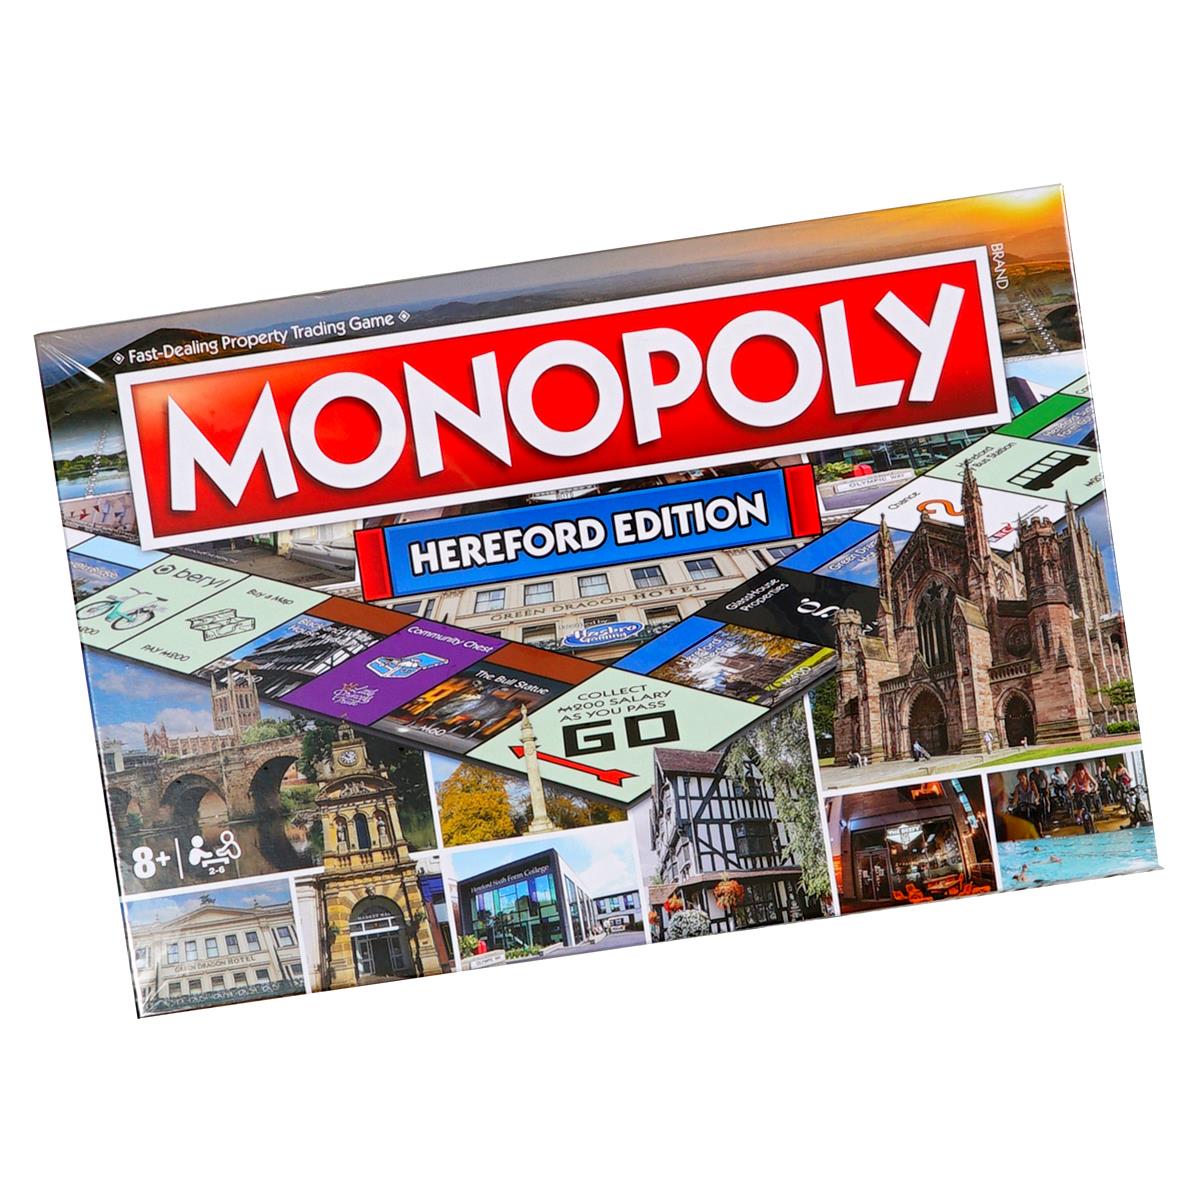 When was the release date of the Hereford Monopoly Special Edition?